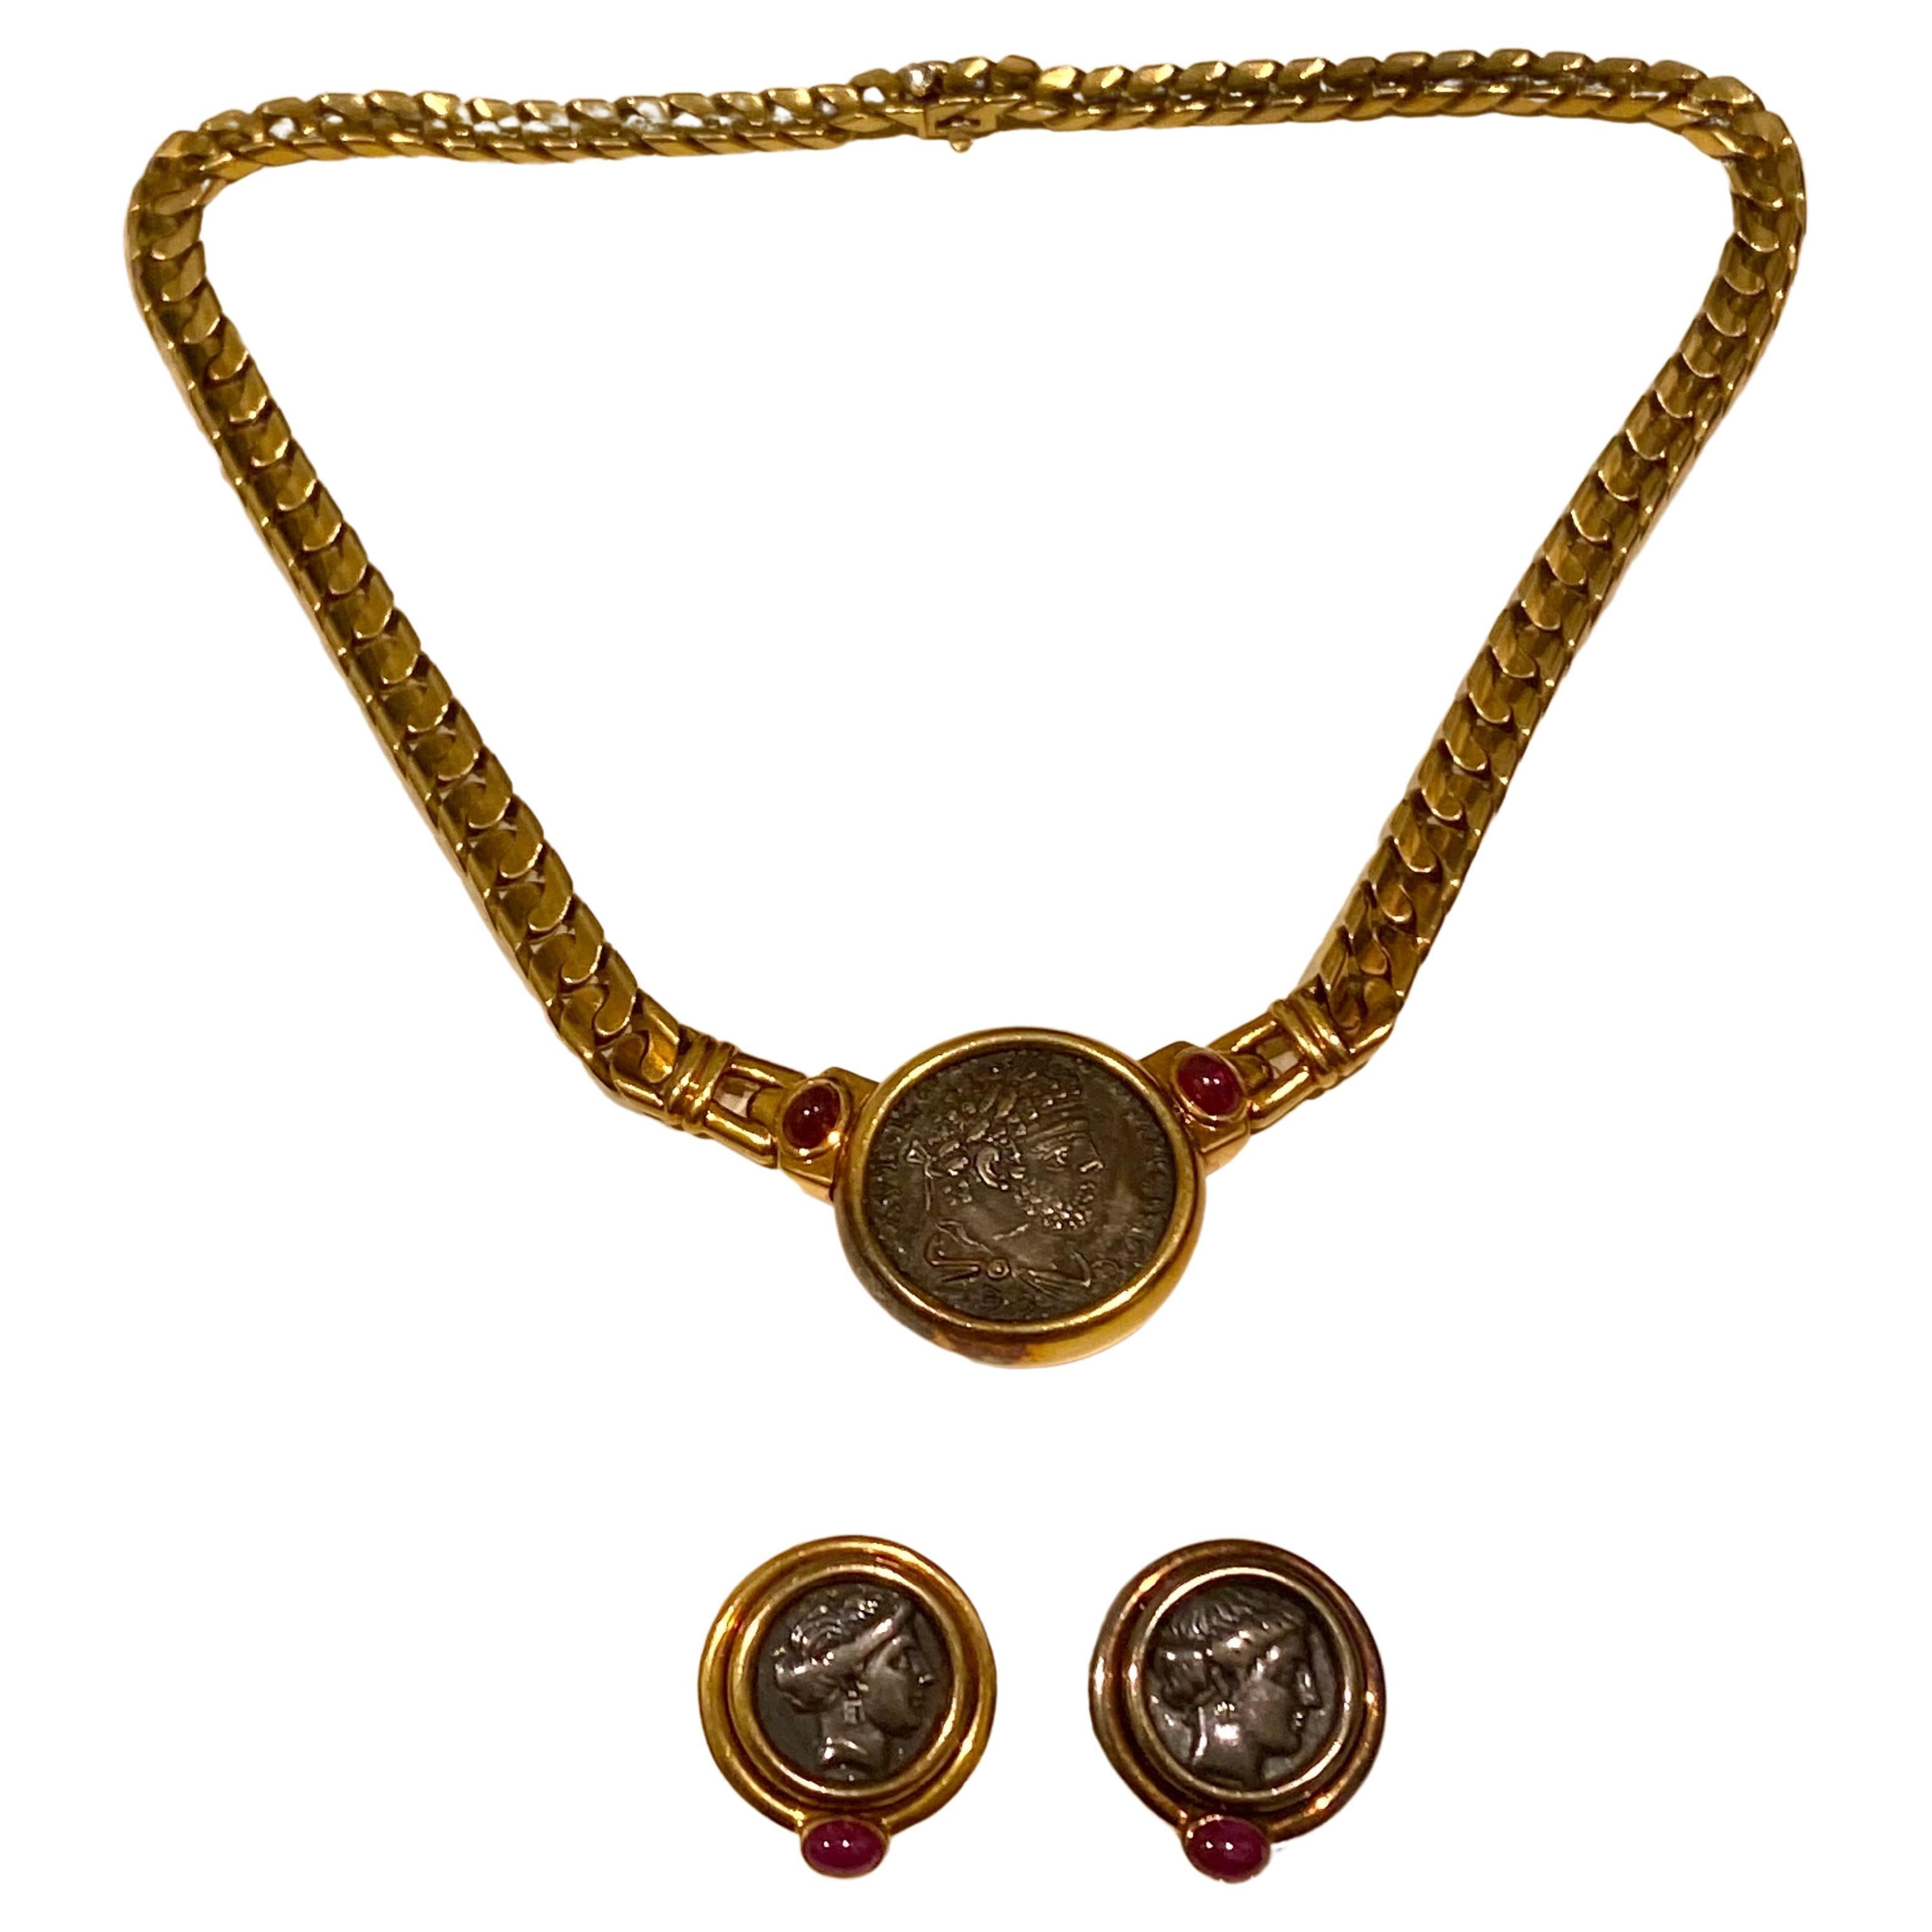 This vintage Bvlgari piece is designed as a curb link chain in 18k yellow gold with gold-framed of the ancient bronze coin as a pendant.  Bezel set with two round cabochon genuine rubies weighing approx. 3.00 carats in total and one round diamond